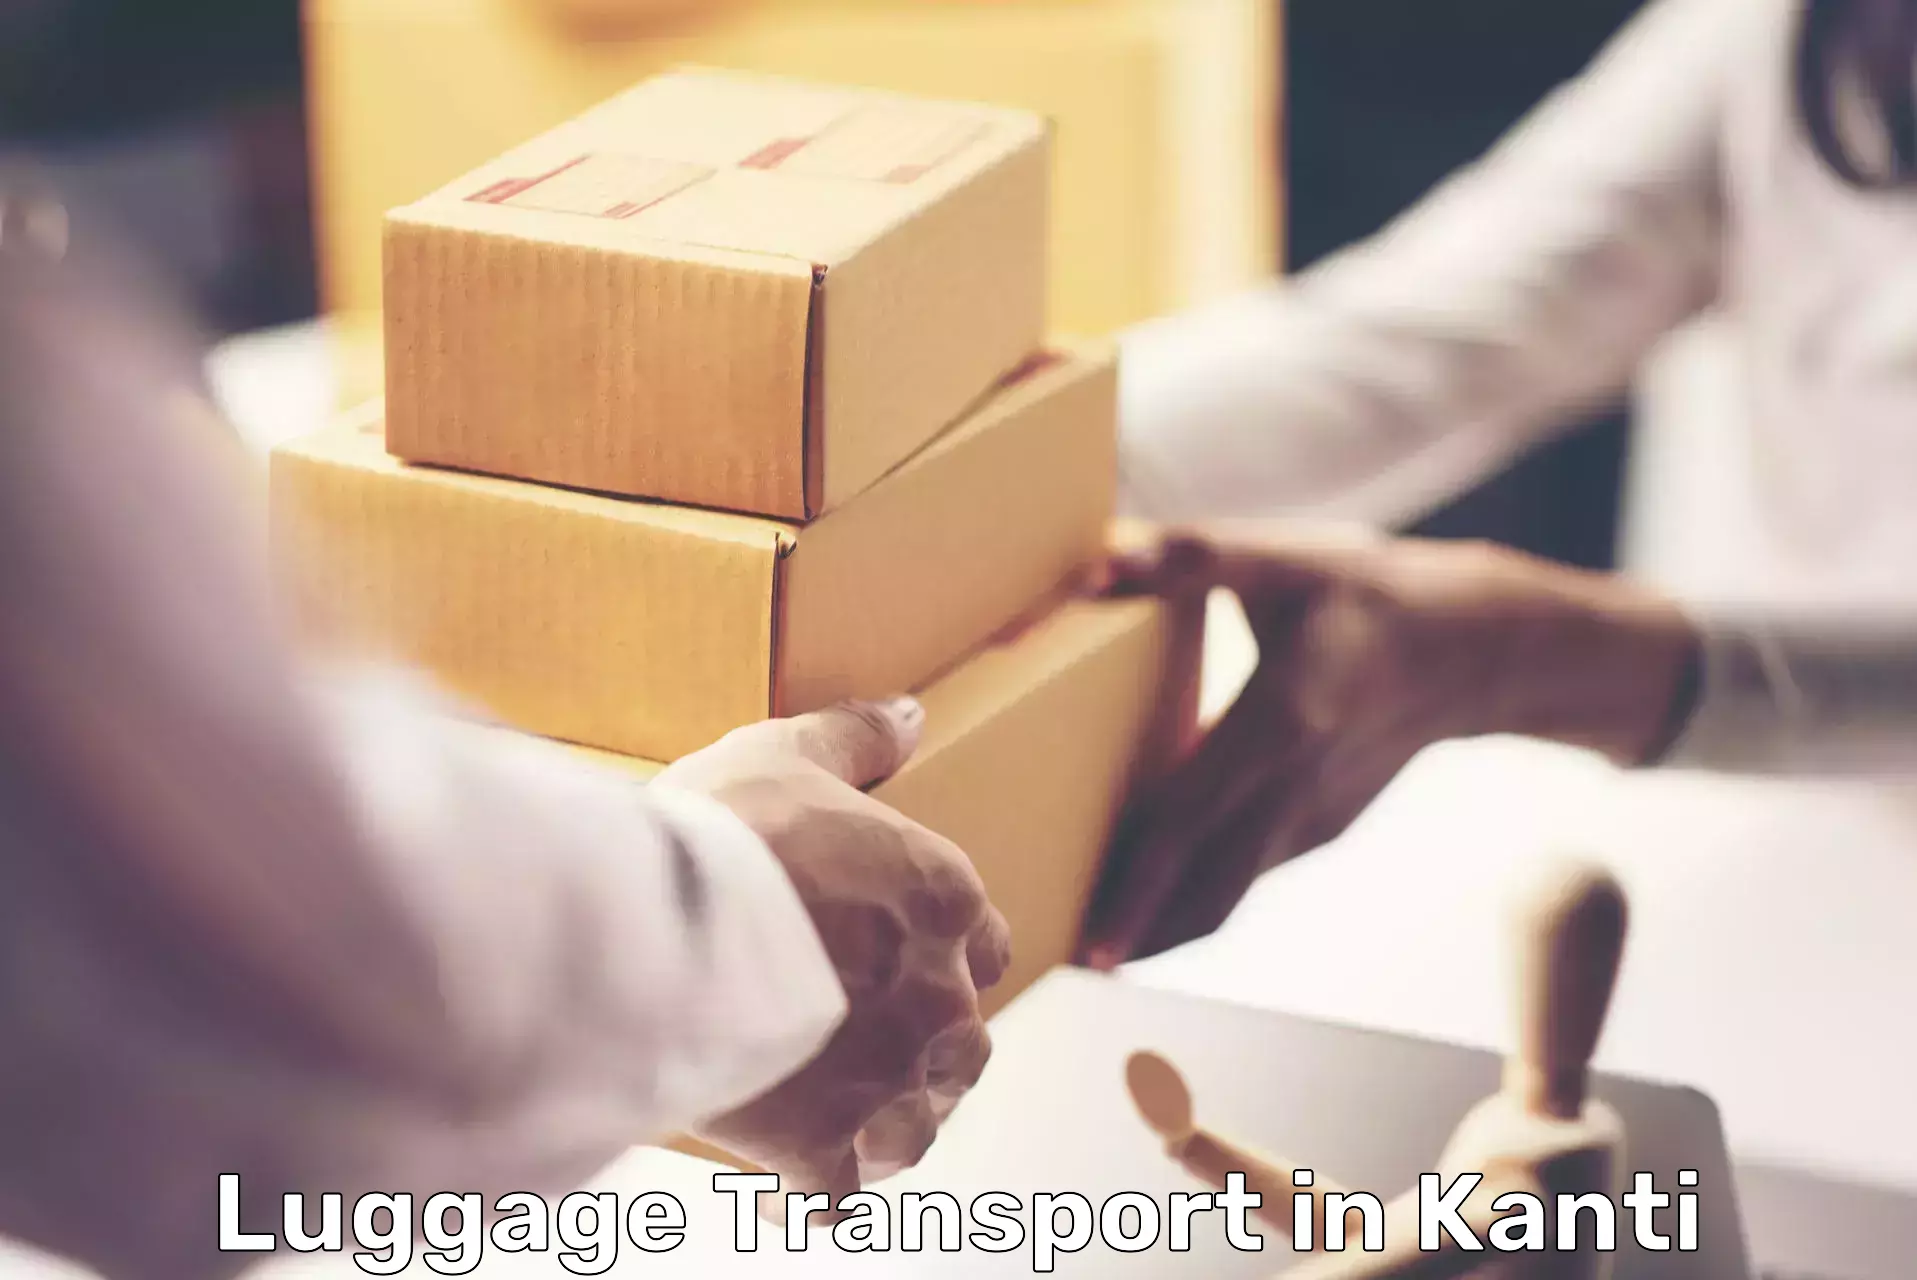 Luggage shipping trends in Kanti